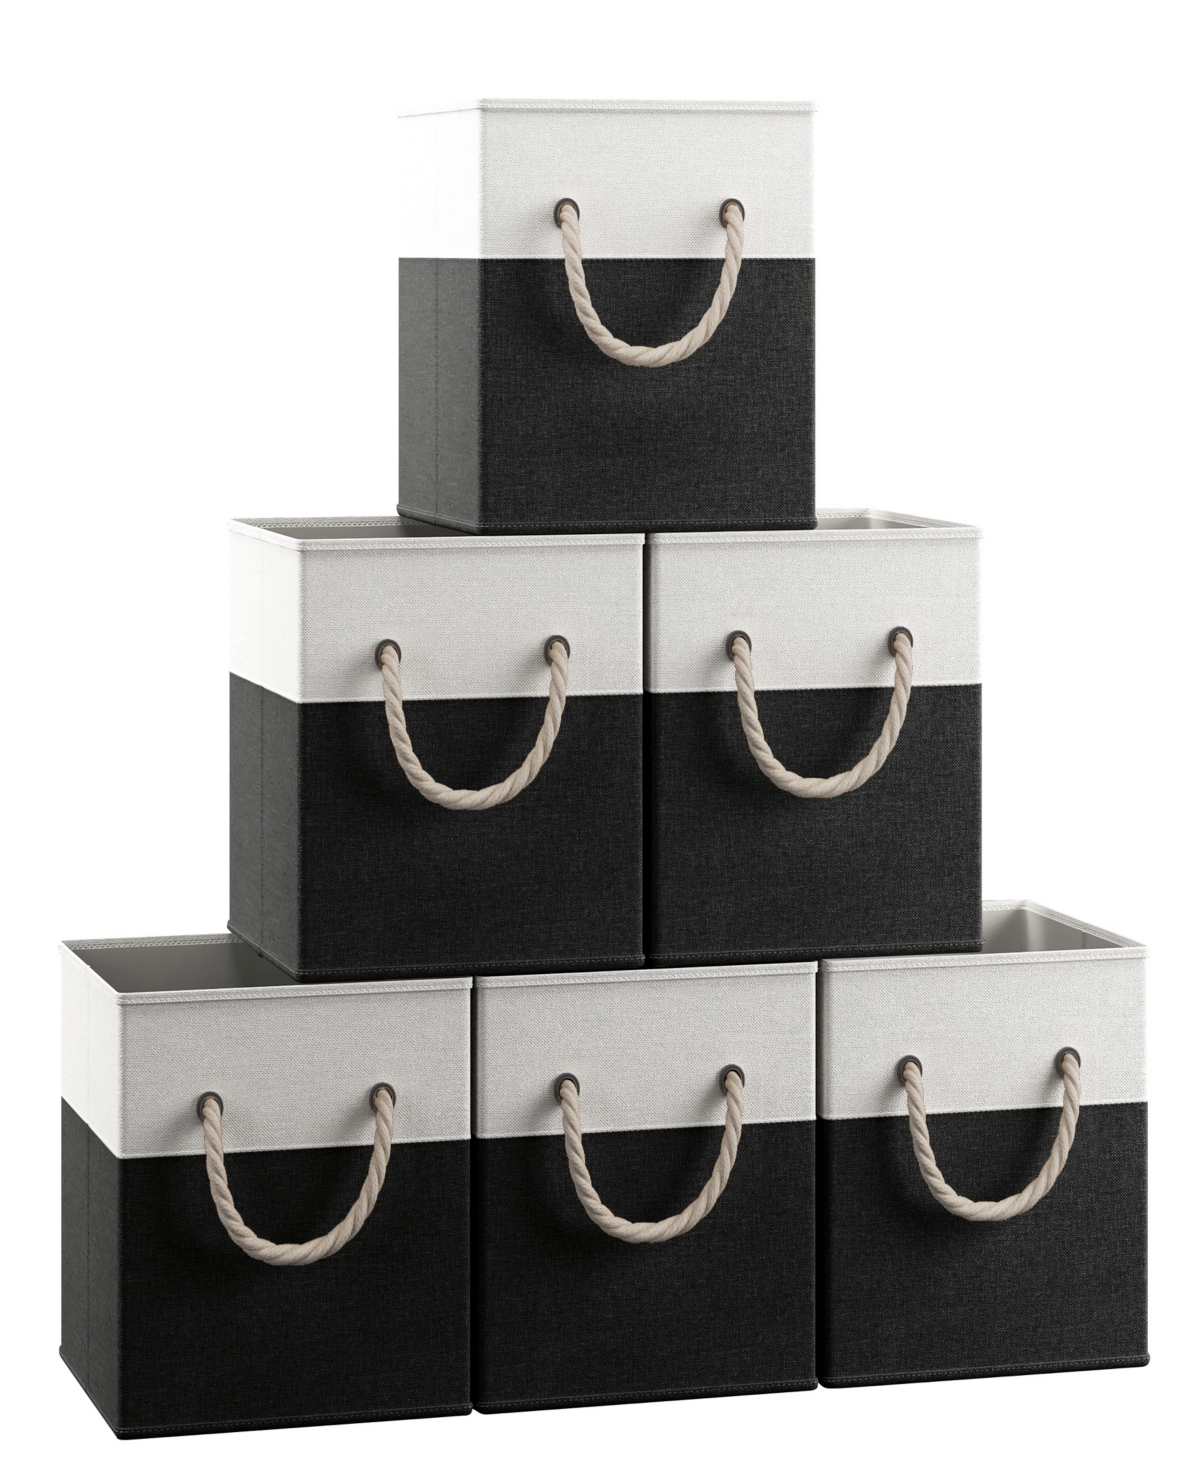 Foldable Linen Storage Cube Bin with Rope Handles - Set of 6 - Black